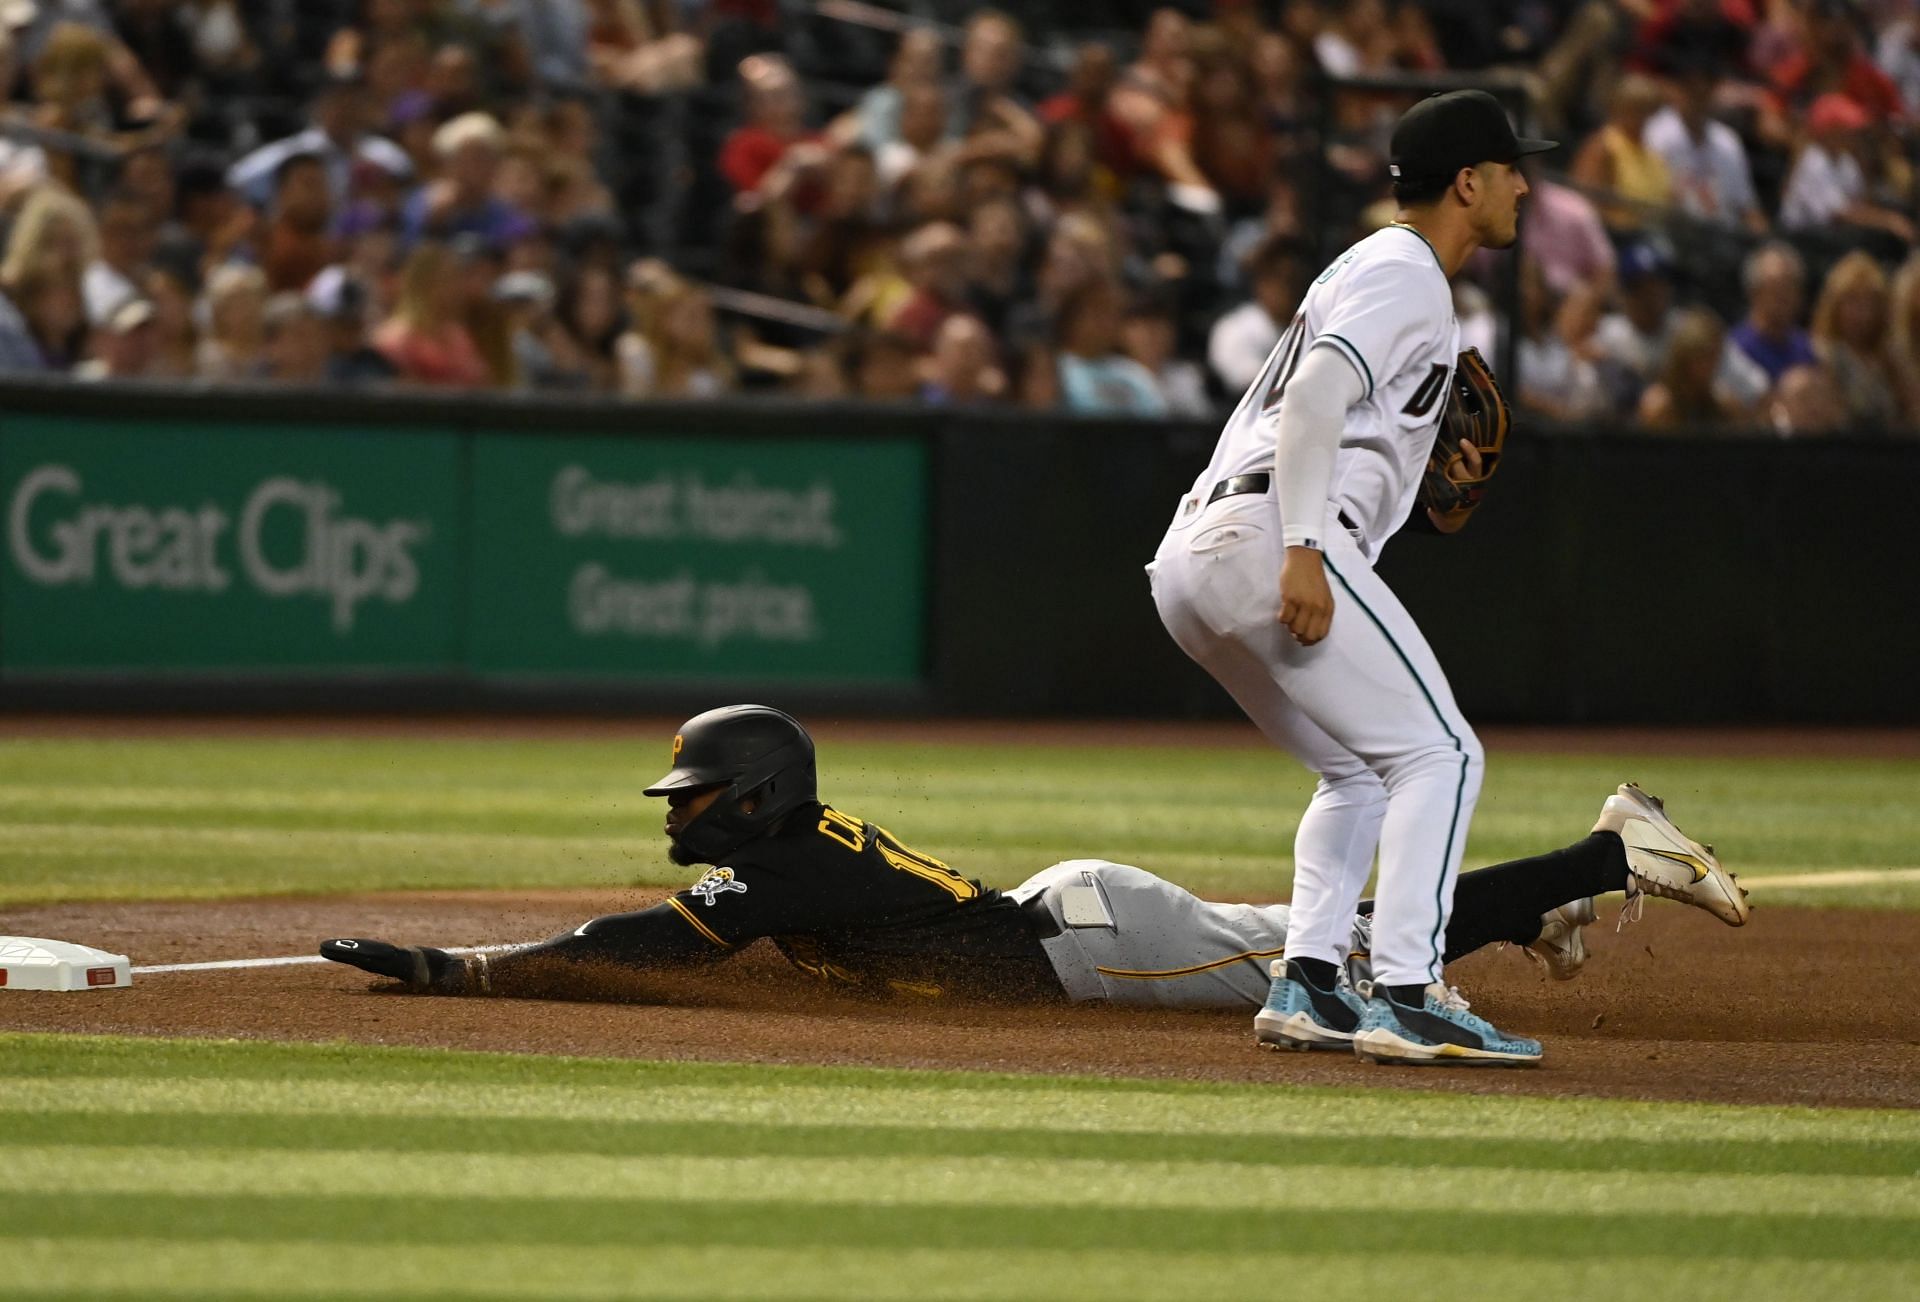 Rodolfo Castro&#039;s phone slipped out of his pocket as he attempted a headfirst slide into third base during a game against the Arizona Diamondbacks.